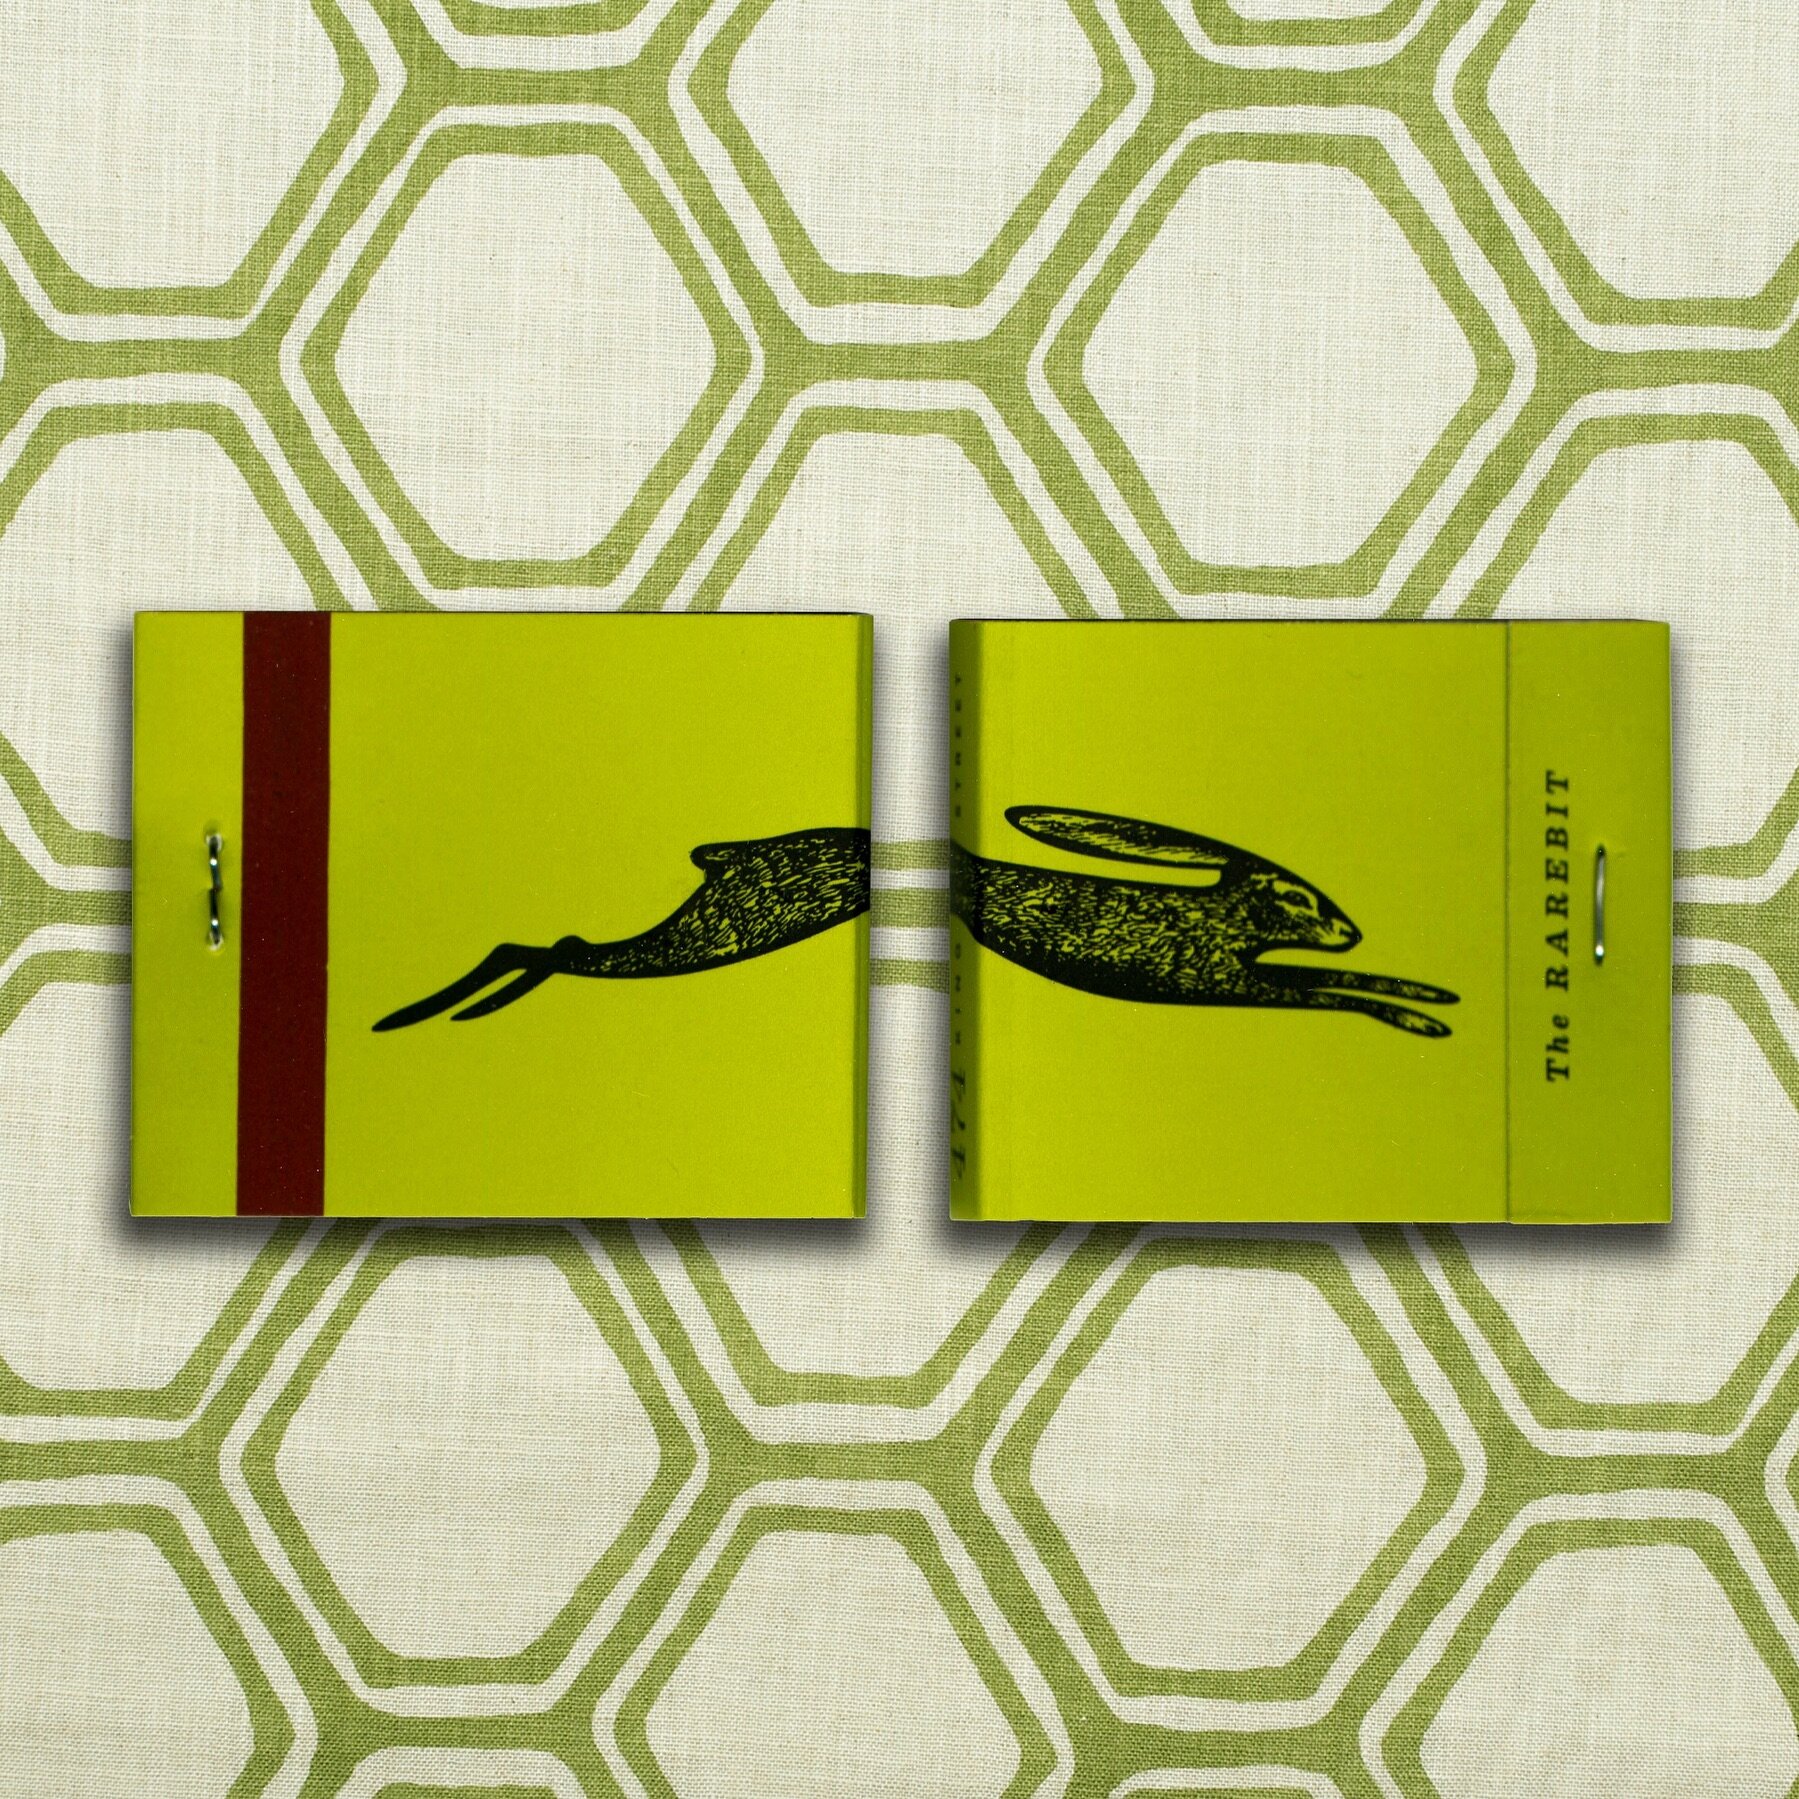 Match of The Day! The Rarebit an awesome restaurant in Charleston focusing on American Gastropub style food! They also have such cool matches! Find the Rarebit featured in our Charleston Collage! #Match #matchbook #matchbox #matchoftheday #art #colla